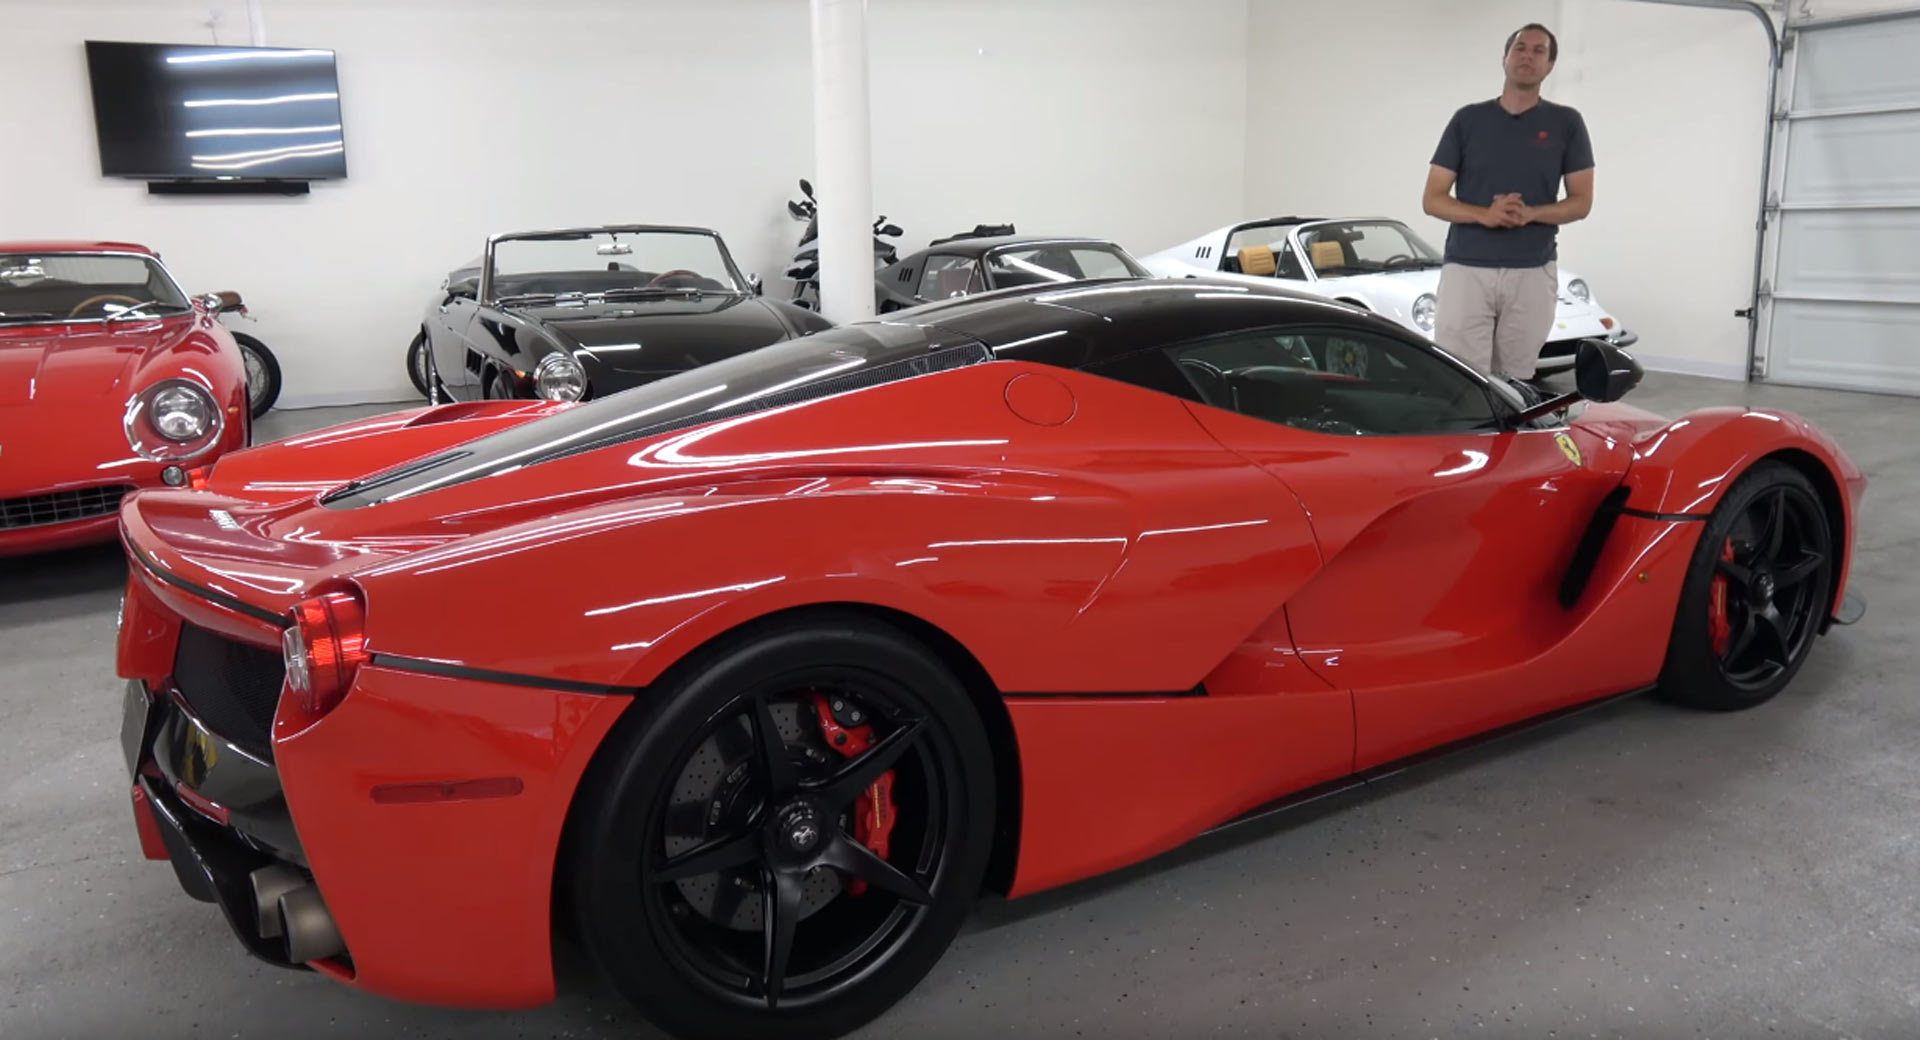 Here's why David Lee is selling his LaFerrari - The Supercar Blog